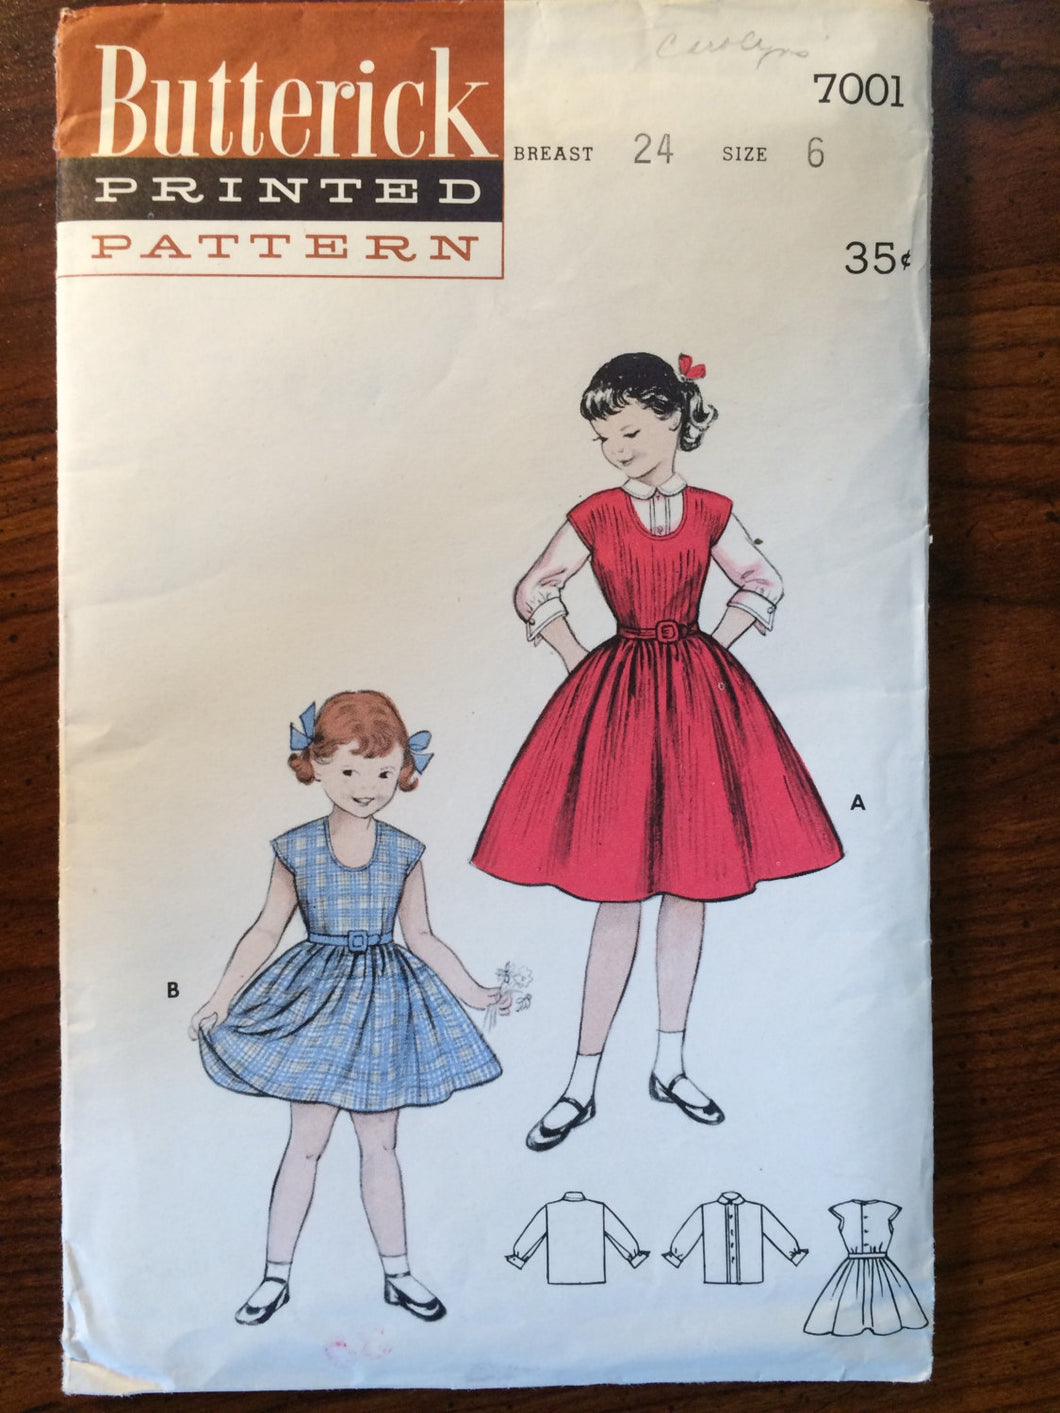 Girl's Dress and Blouse Pattern Vintage 1950s Butterick #7001 Size 6, Breast 24